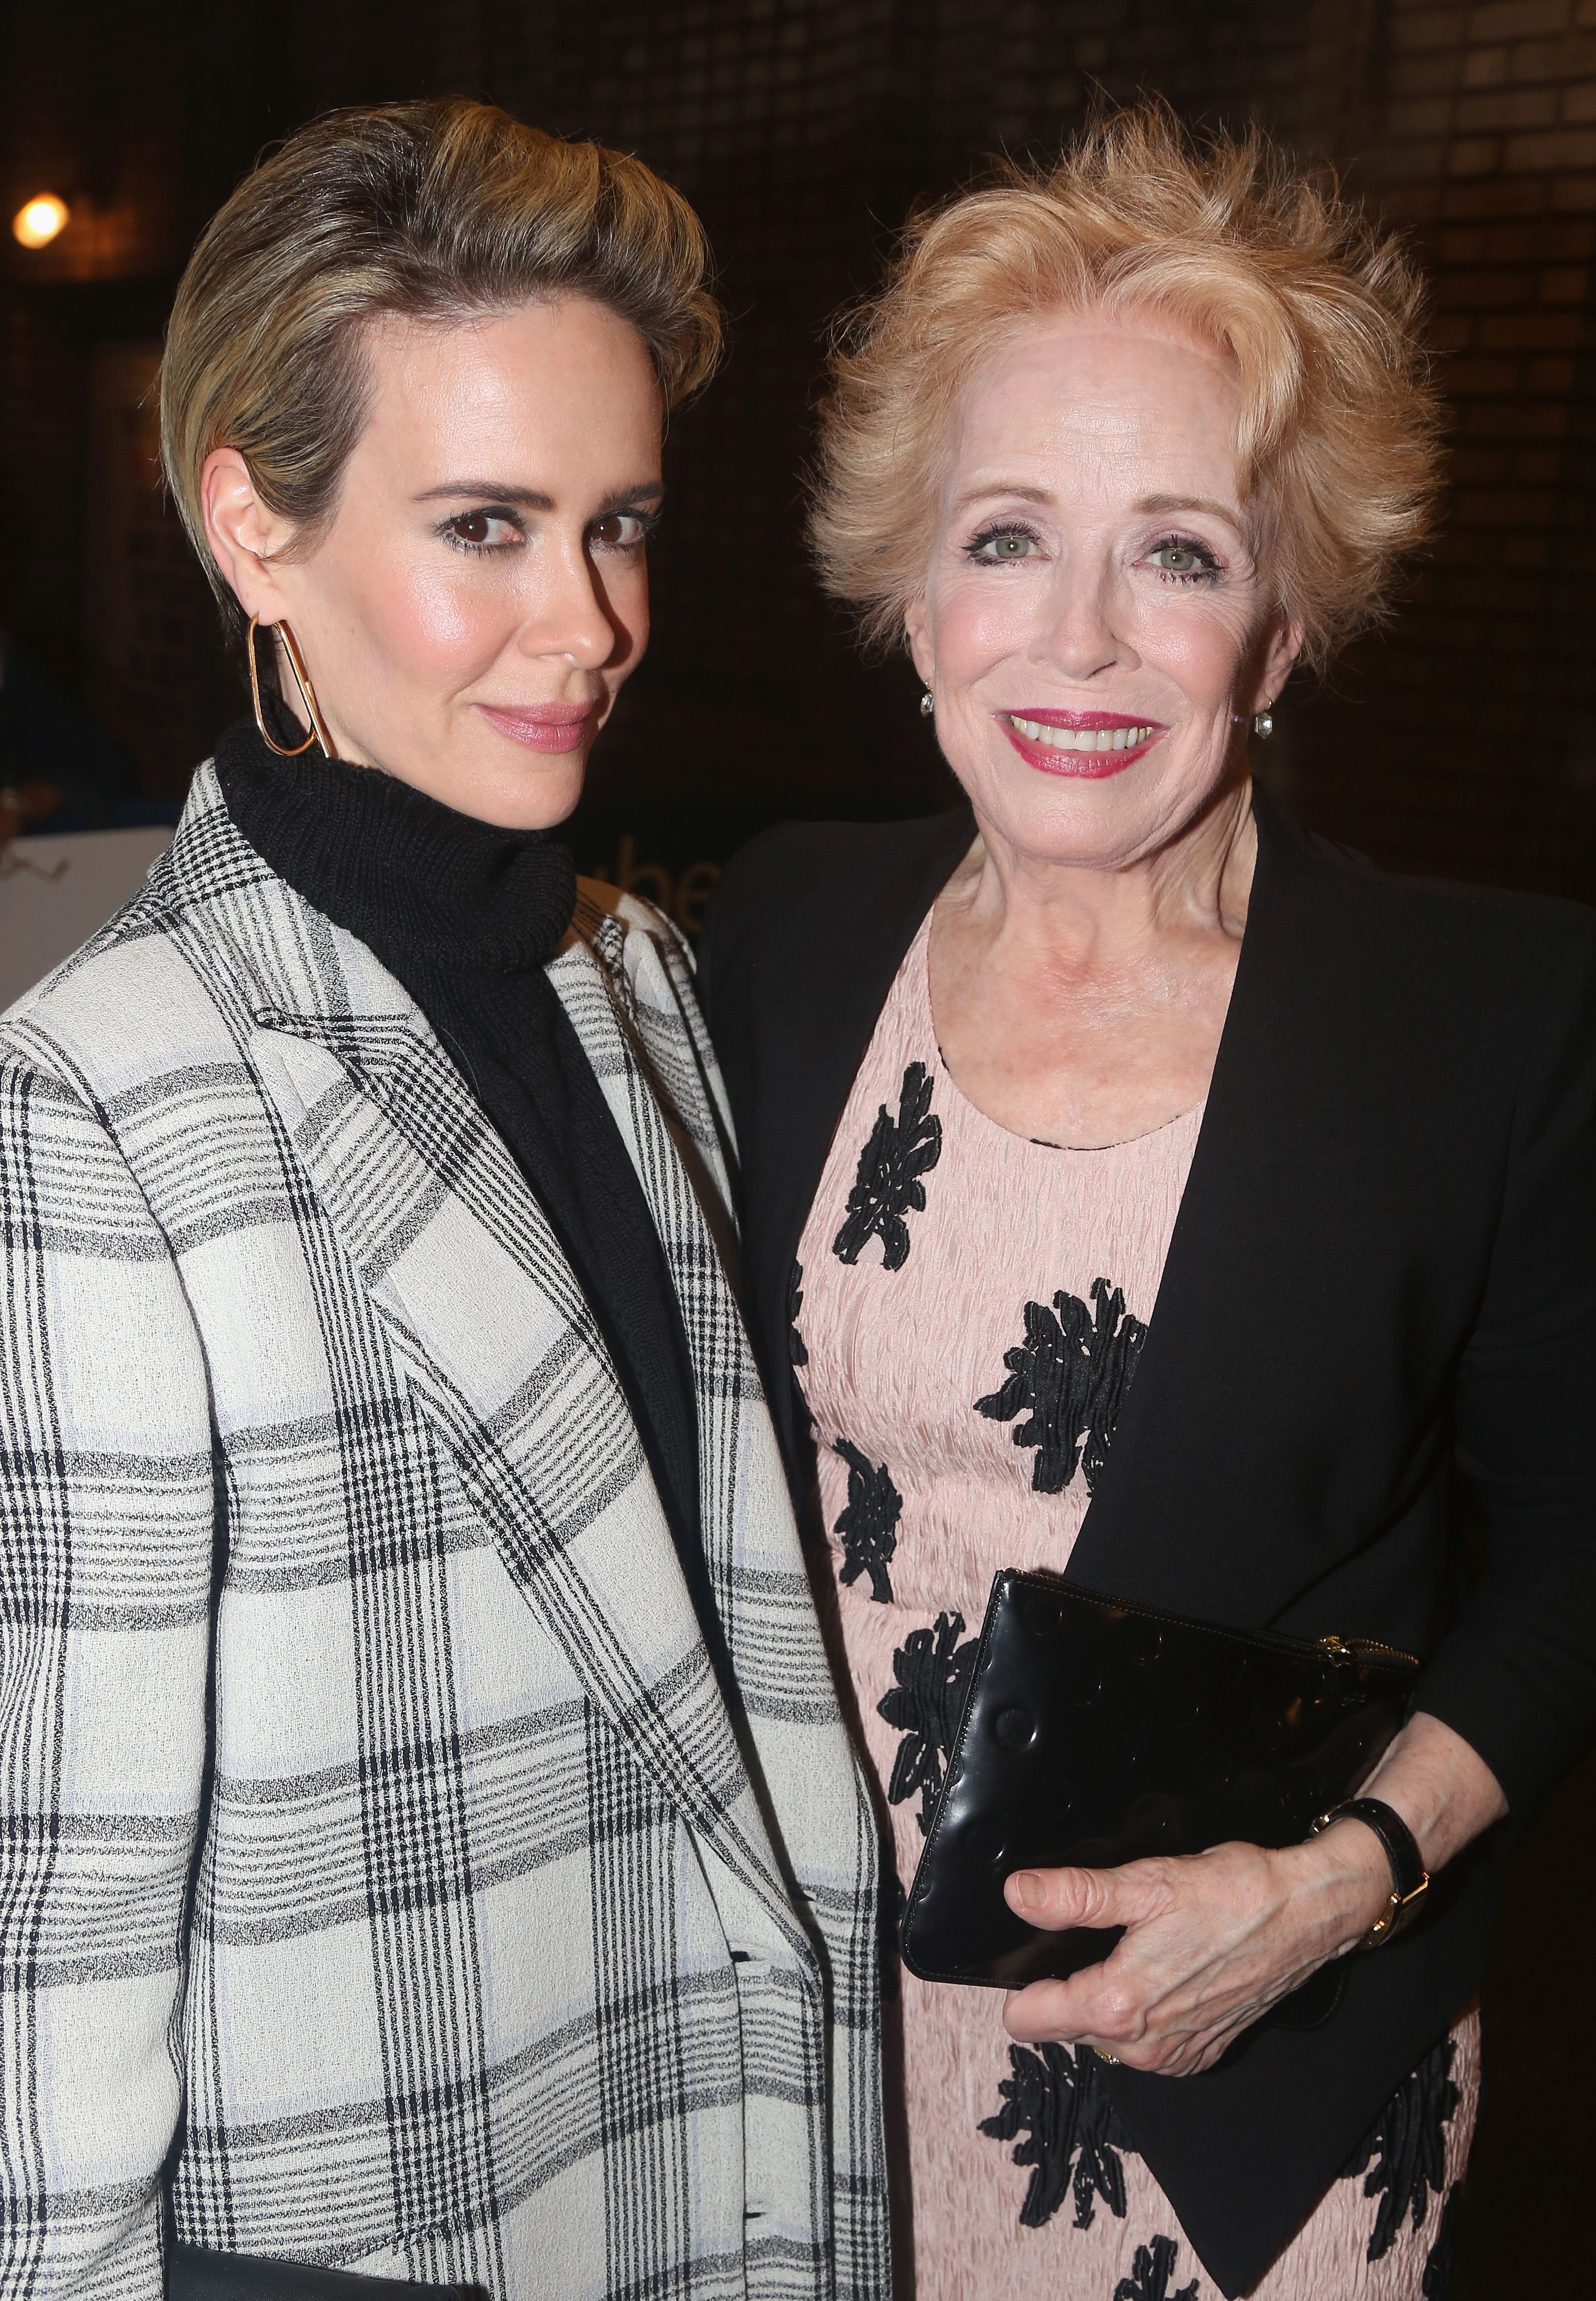 Sarah paulson holland taylor age difference